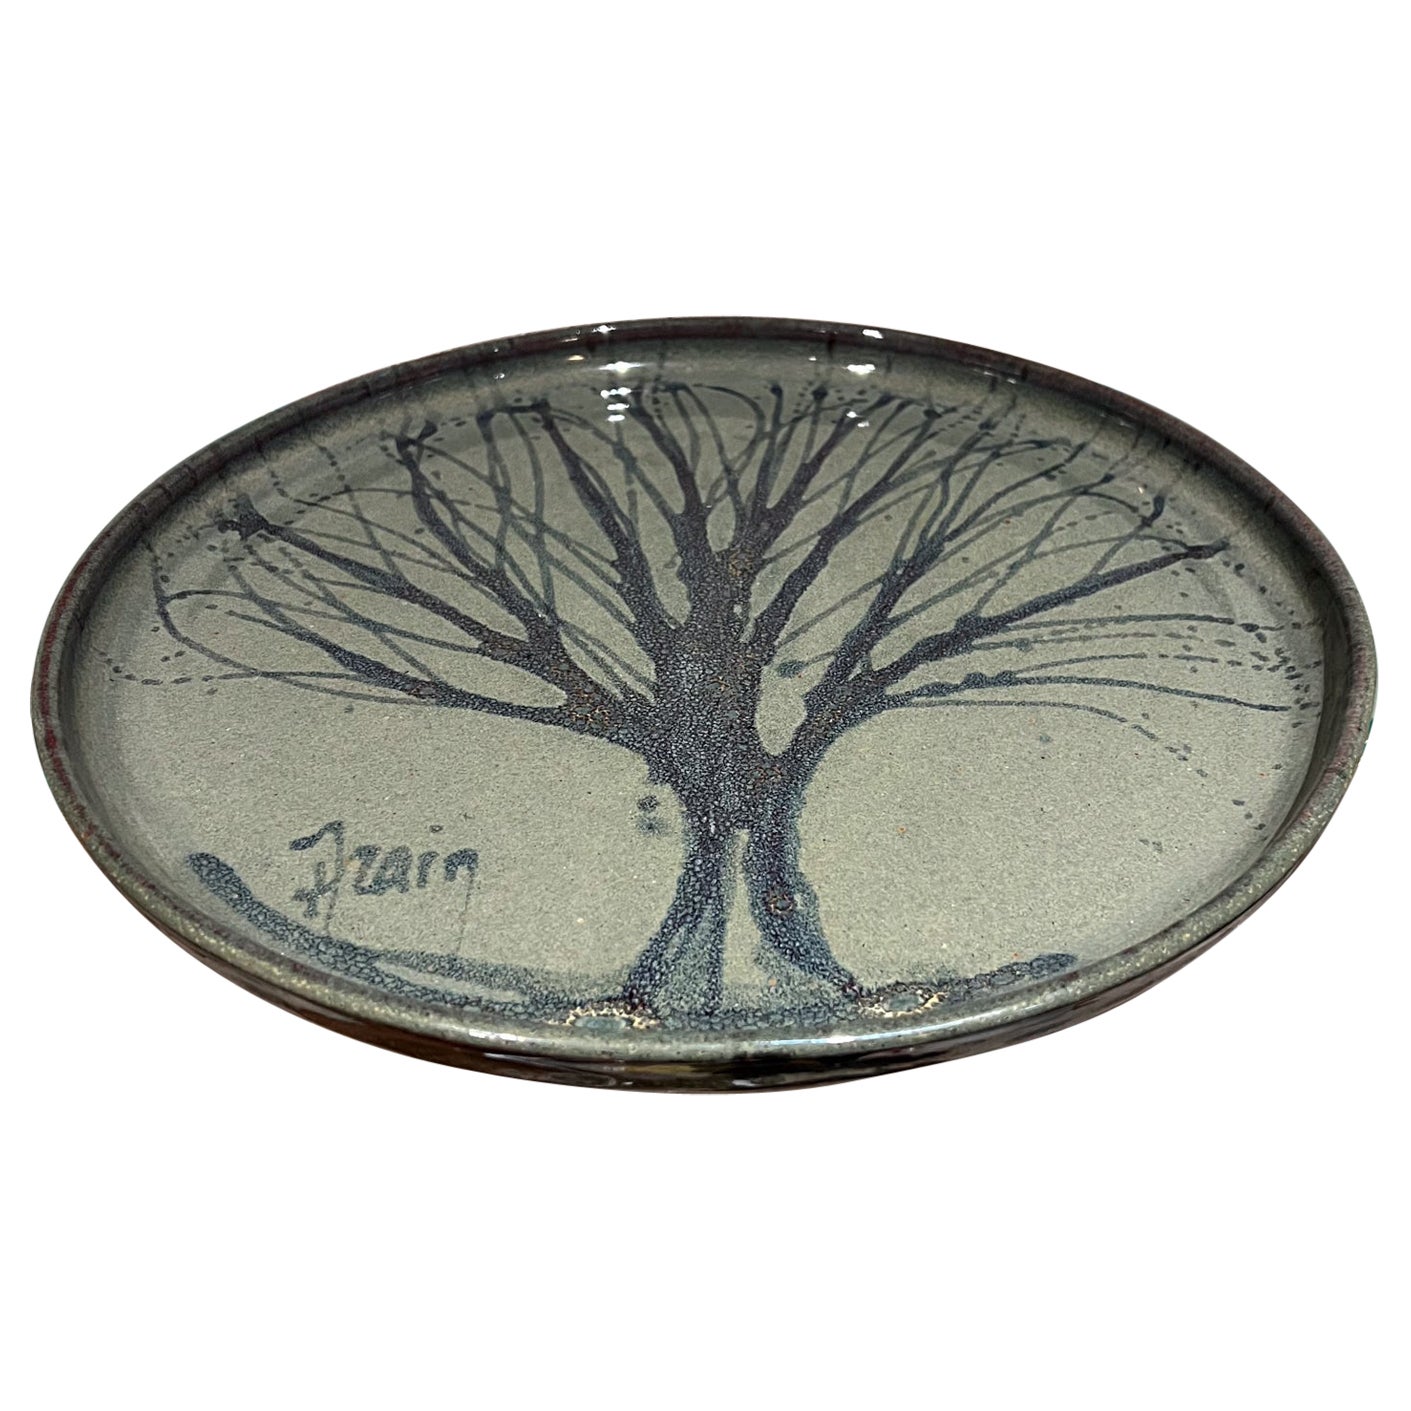 2000s Studio Art Pottery Plate Abstract Tree Tim Frain TN For Sale